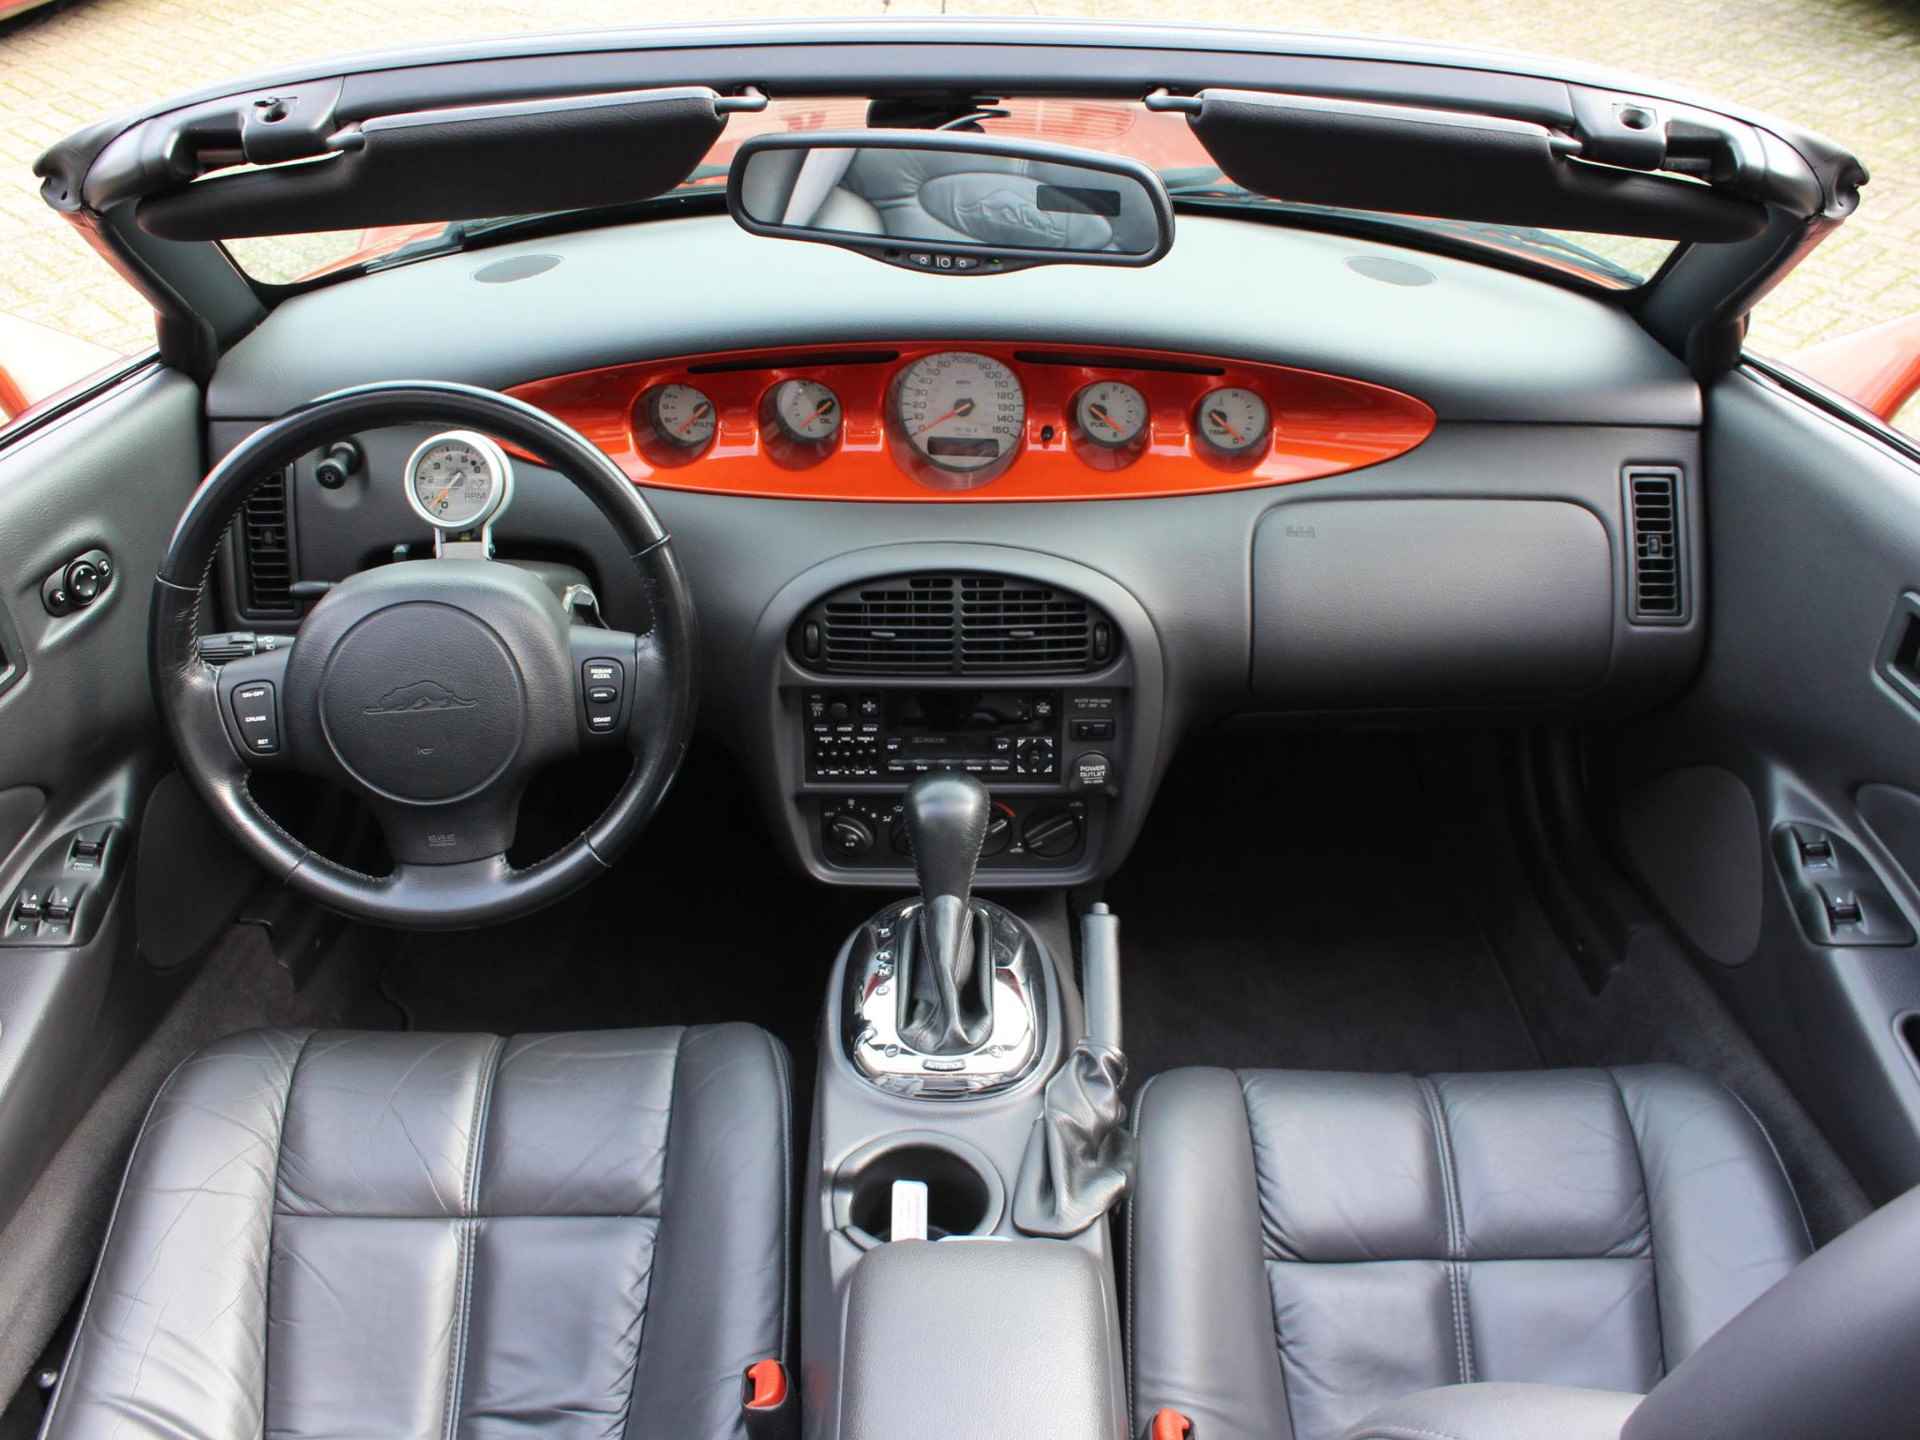 Plymouth Prowler Automaat 3.5i-V6 Youngtimer Nieuwe Cabriokap, Wind scherm Auto is in Concoursstaat. - 12/17